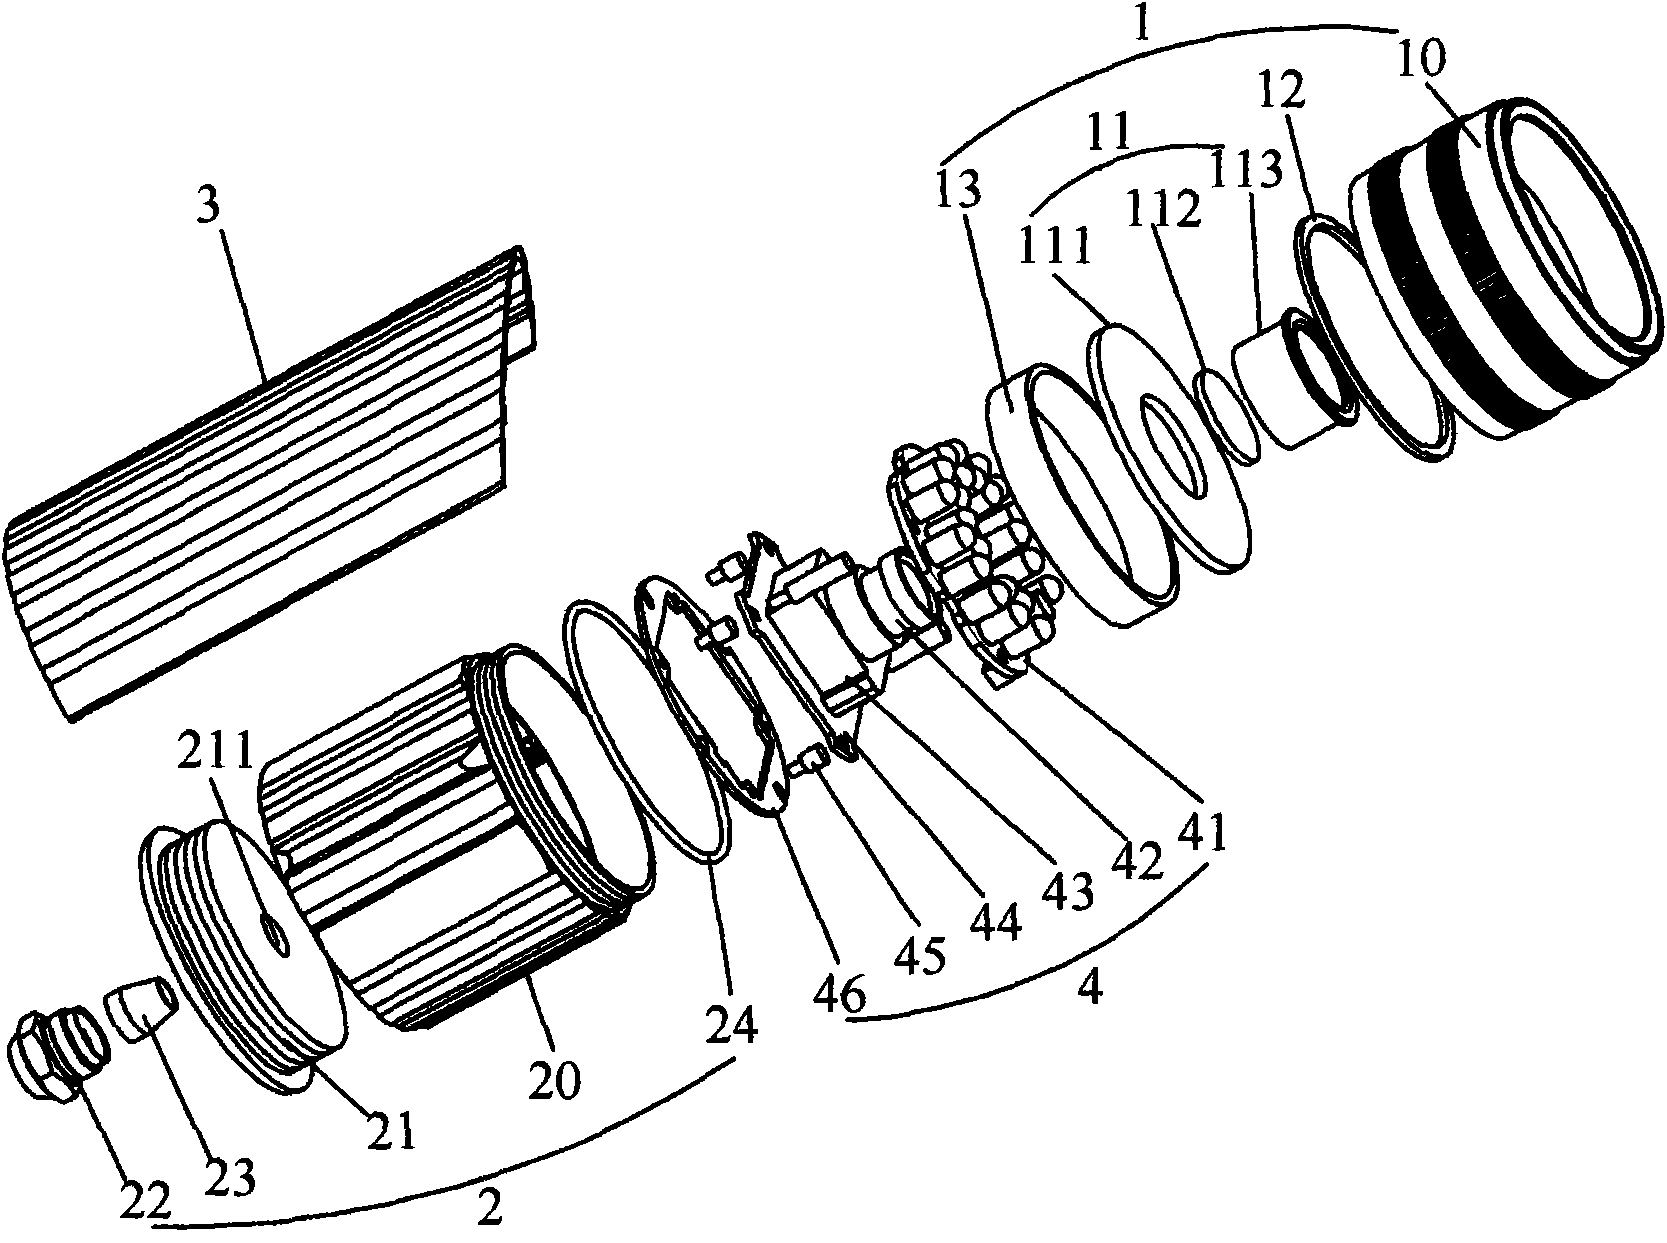 Camera and double-ring glass component thereof